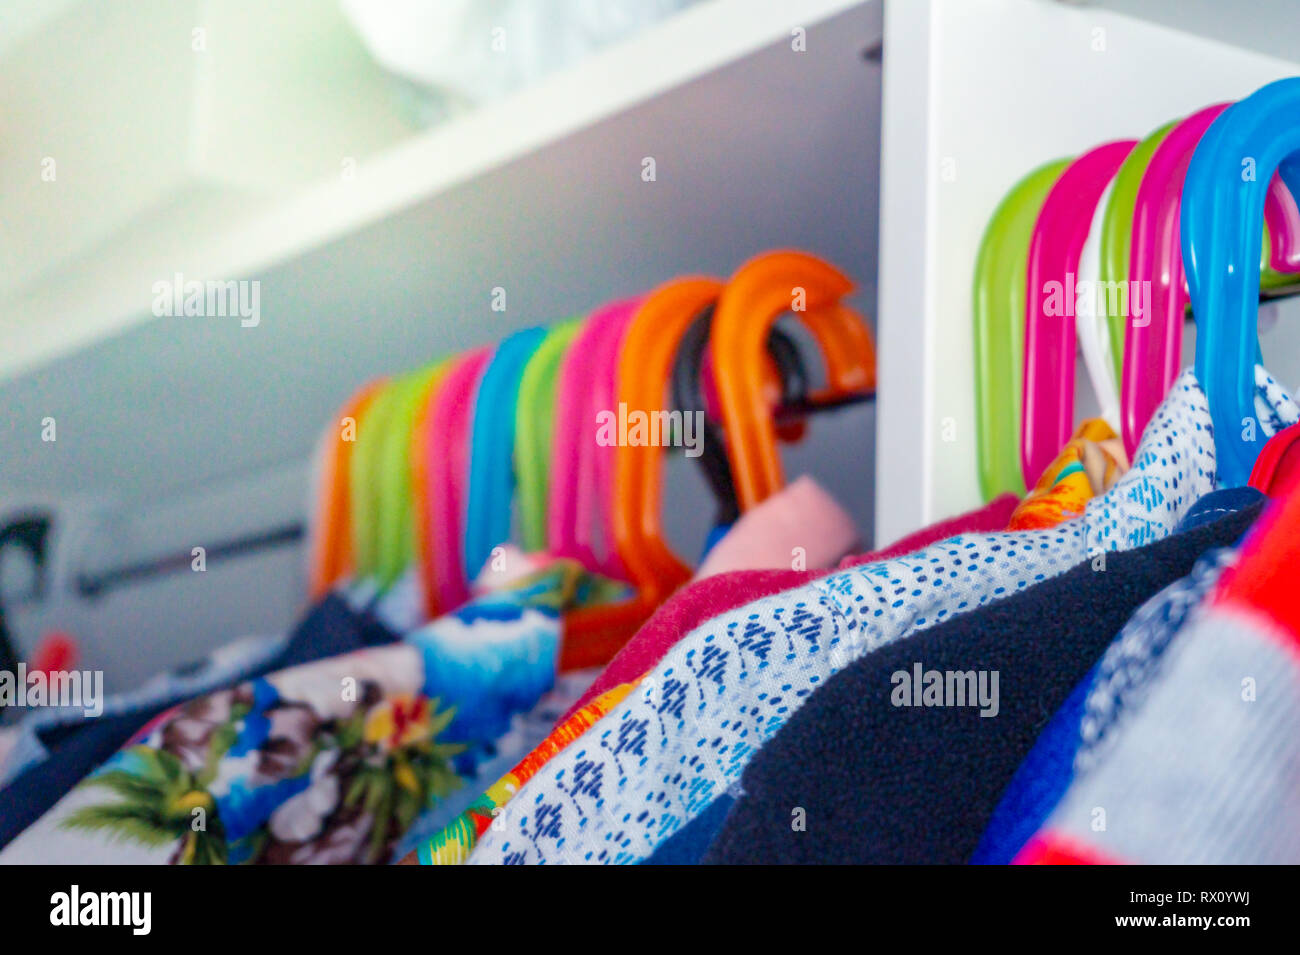 Colorful kid's hangers with toddler boy's shirts hanging in a closet. Stock Photo